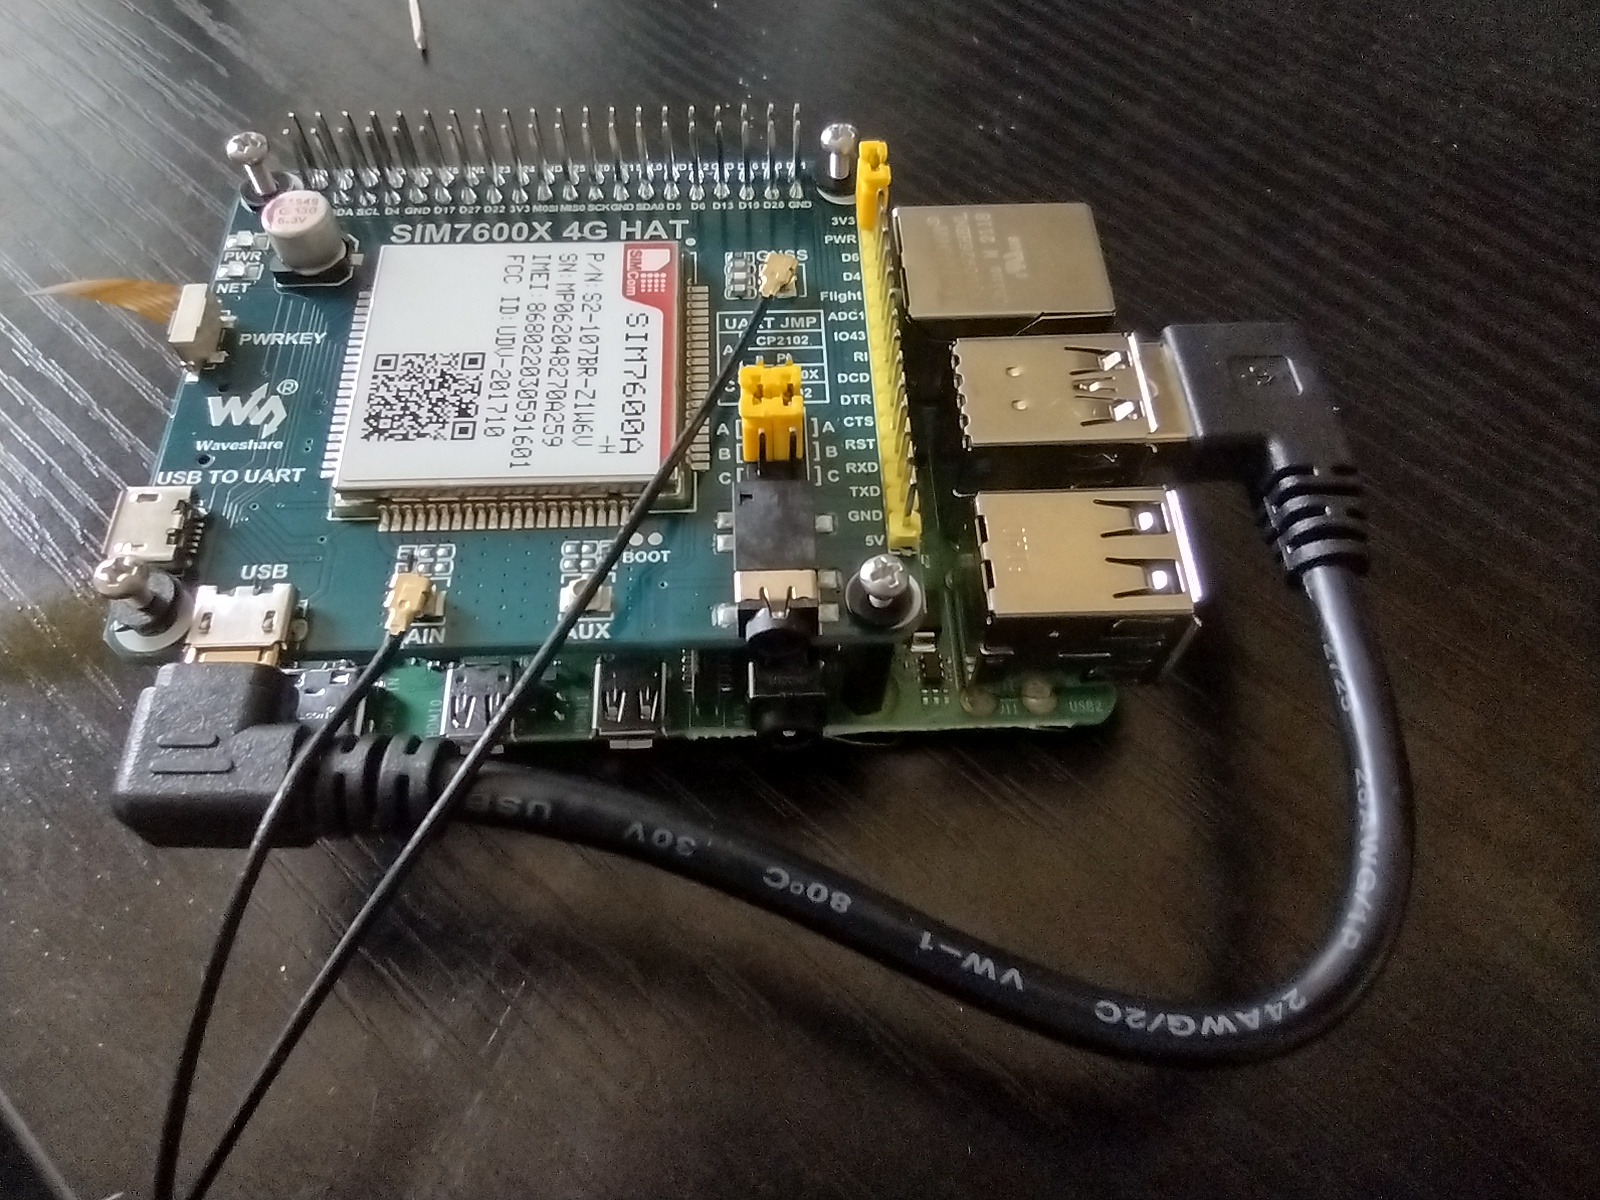 Connected Raspberry Pi and Waveshare